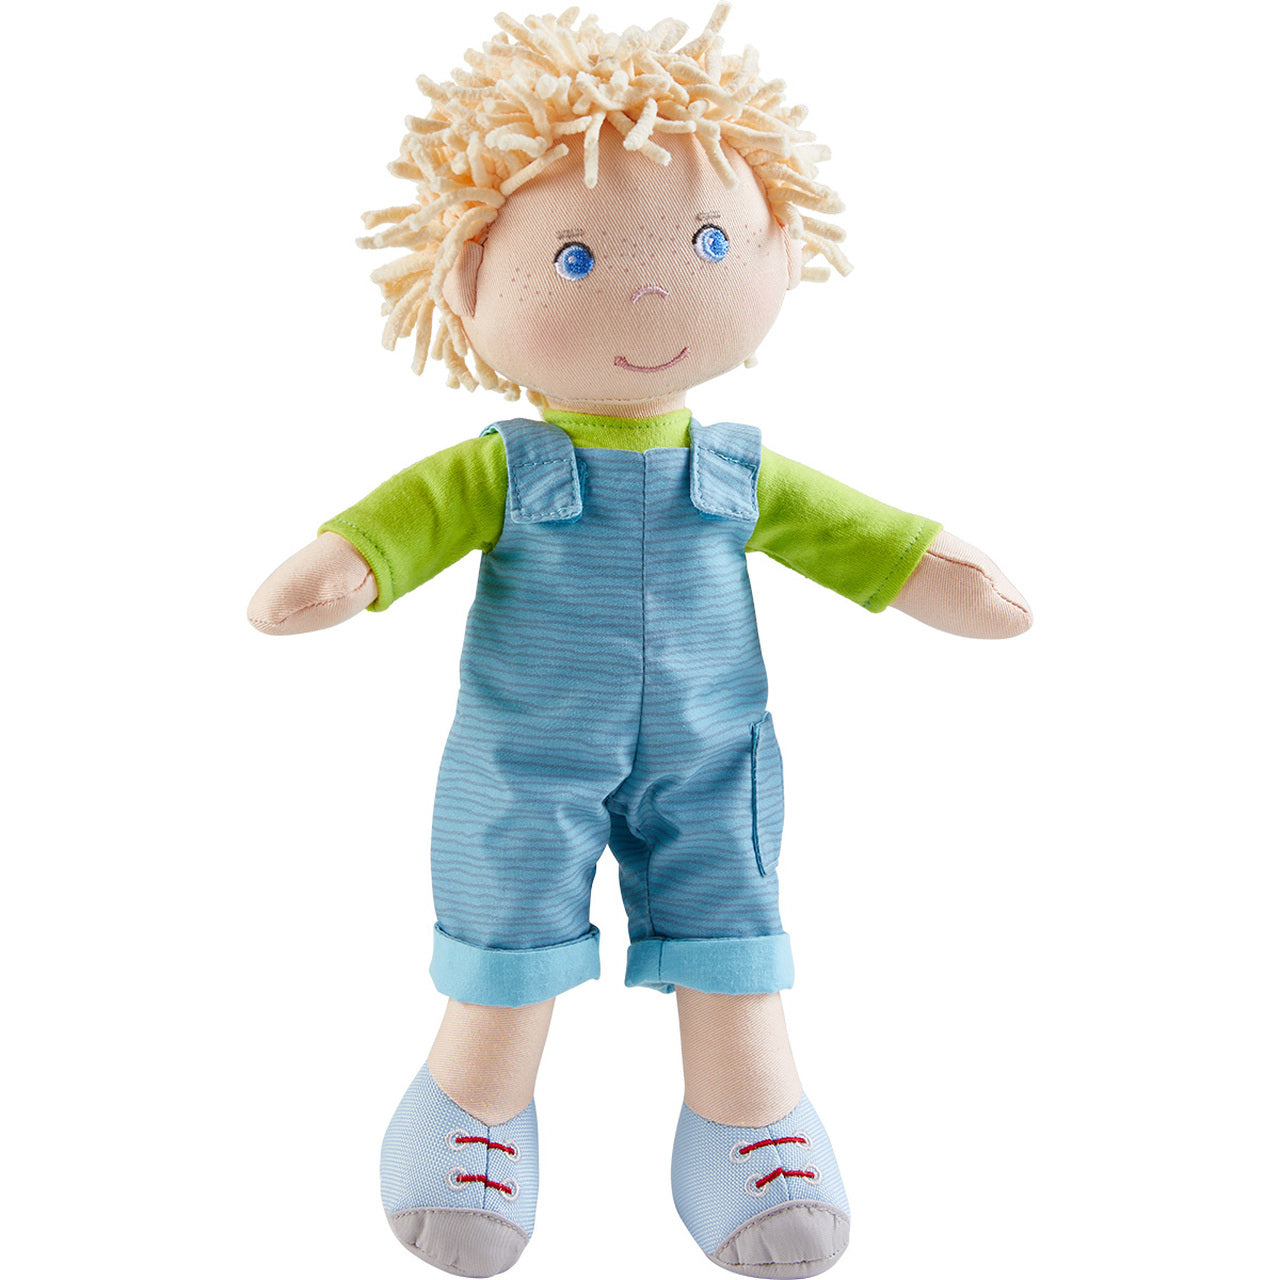 A Nick Boy's Rag Doll doll from HABA in the bib overalls and long sleeve polo outfit sold separately